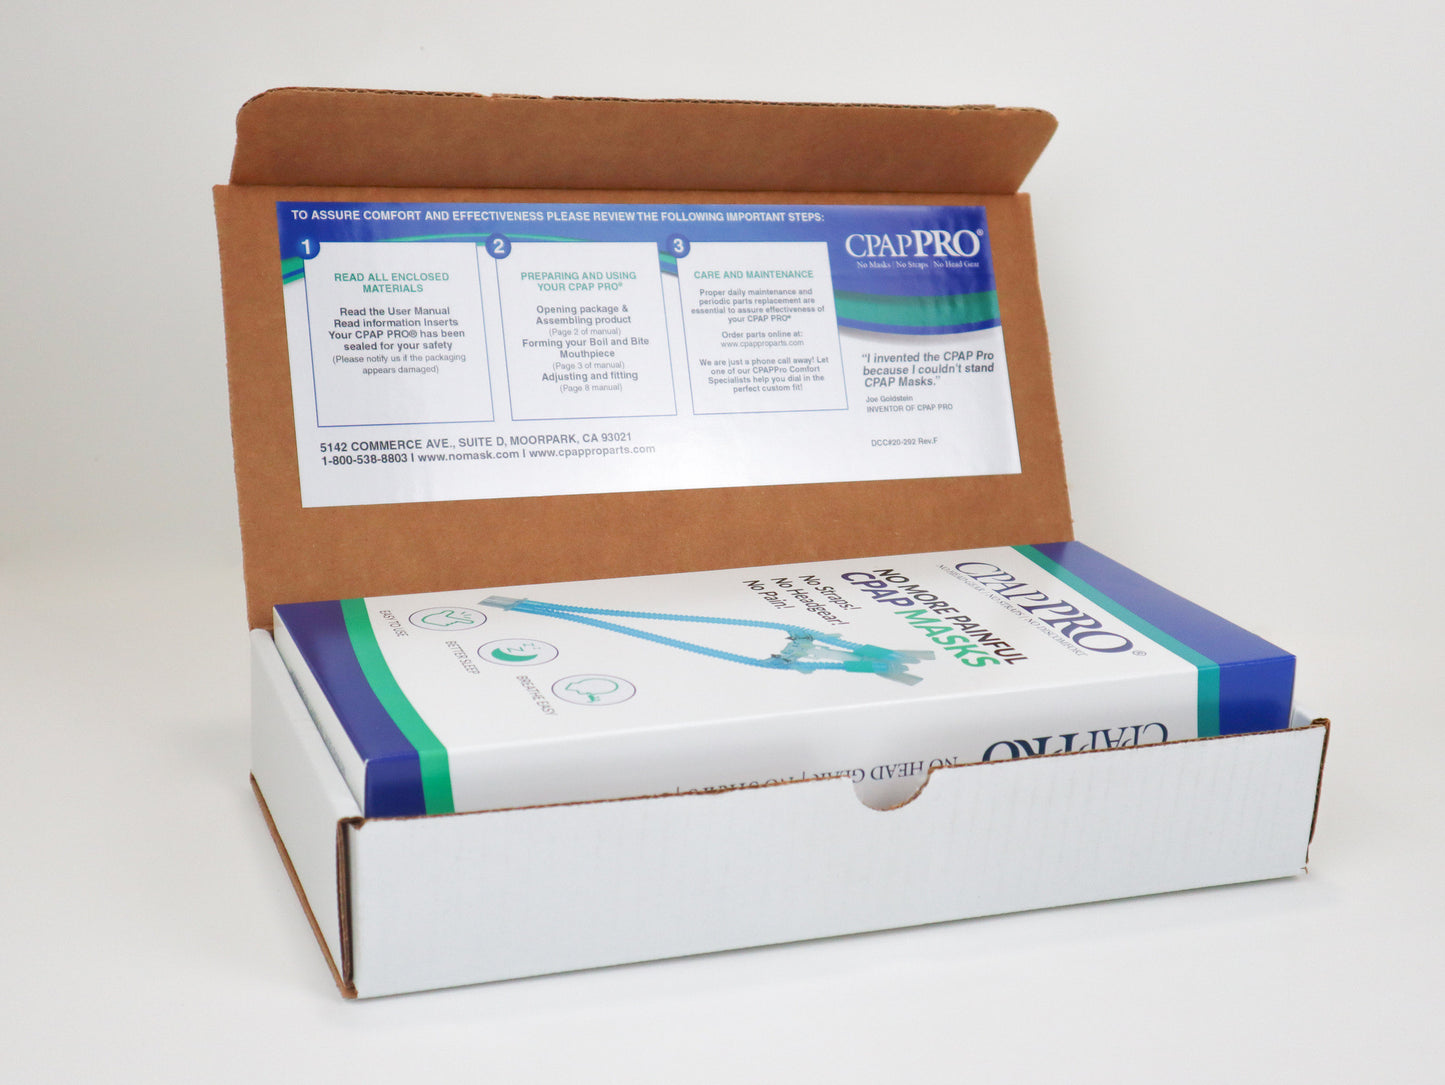 CPAP Pro product box.